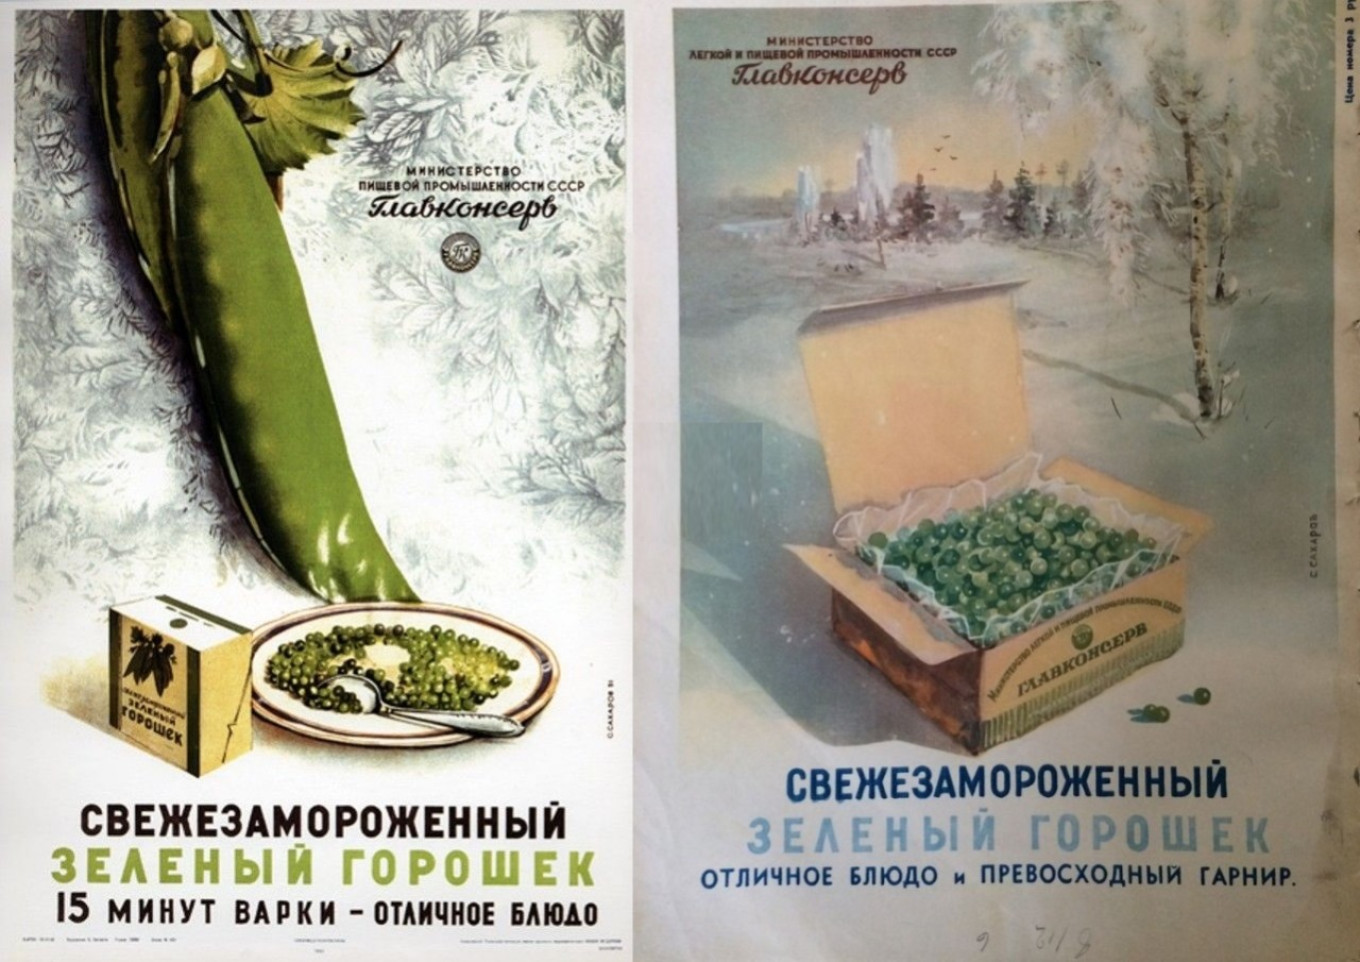 
					 Fresh-frozen green peas (Soviet posters of the 1930s)					 					Wikimedia Commons				